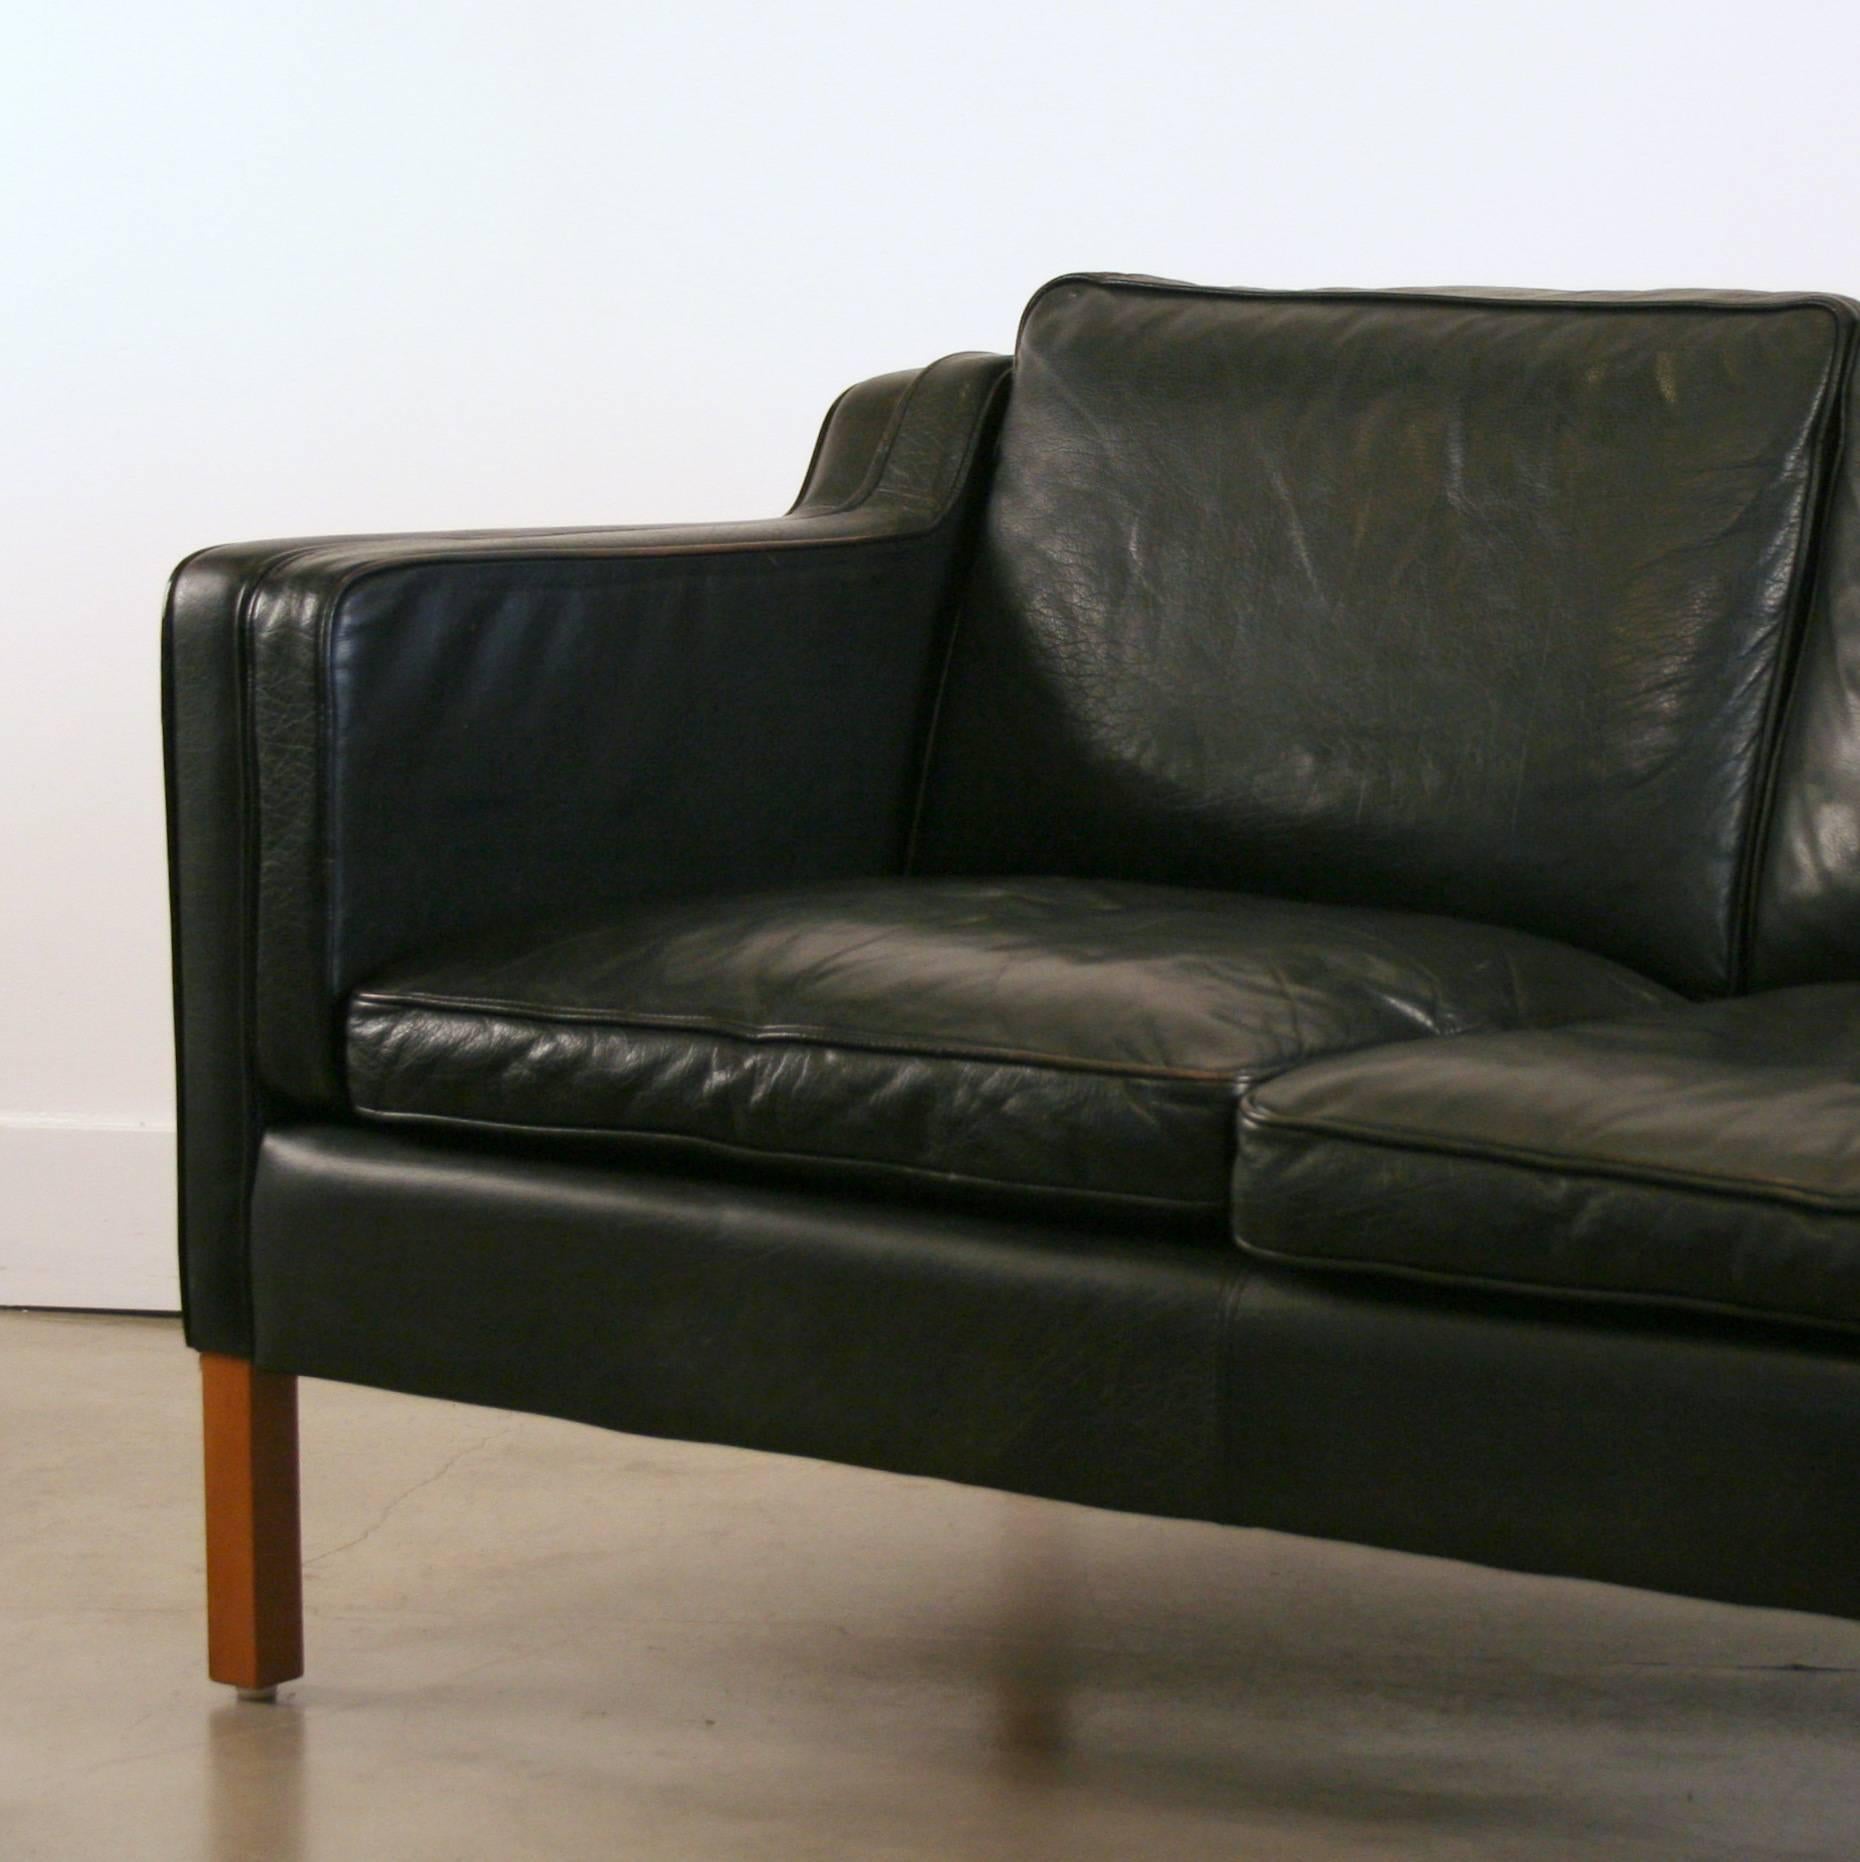 Supple full-grain black leather covers this sleek design modeled after the Classic Borge Mogensen sofa designs of the 1950s and 1960s. This vintage piece features the signature sloped arms with piping detail, and the loose cushions are filled with a